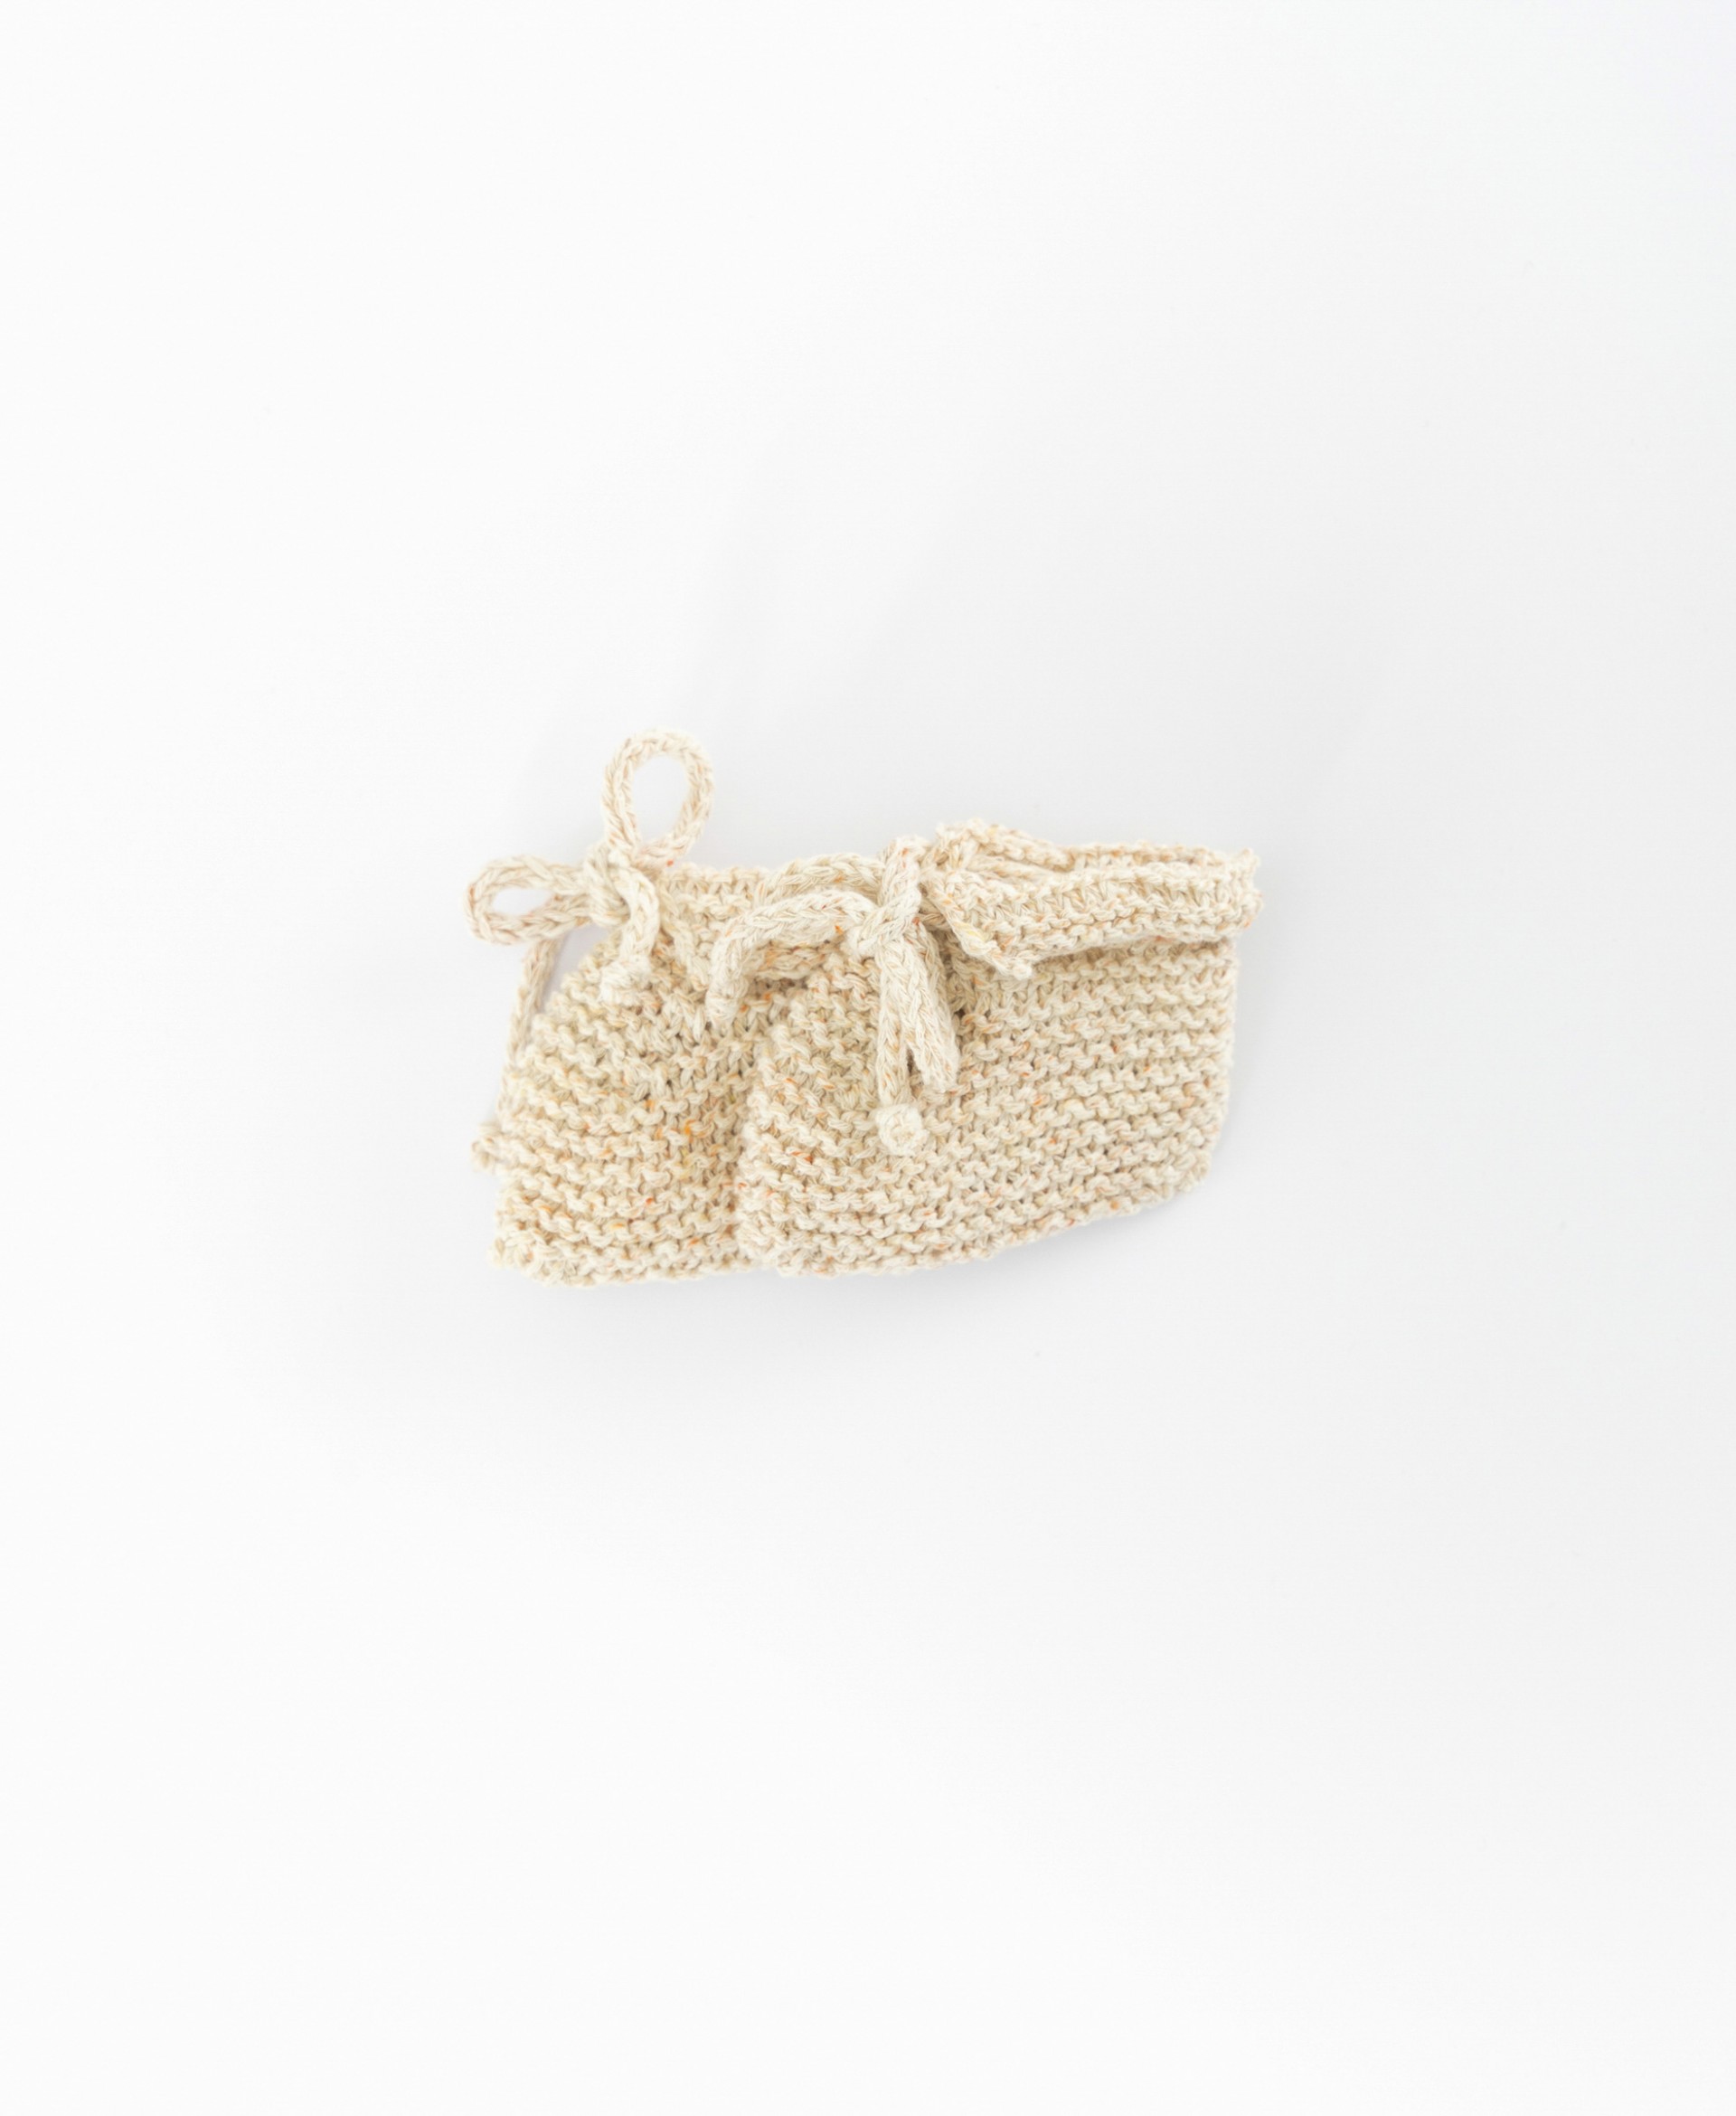 Knitted booties | Basketry